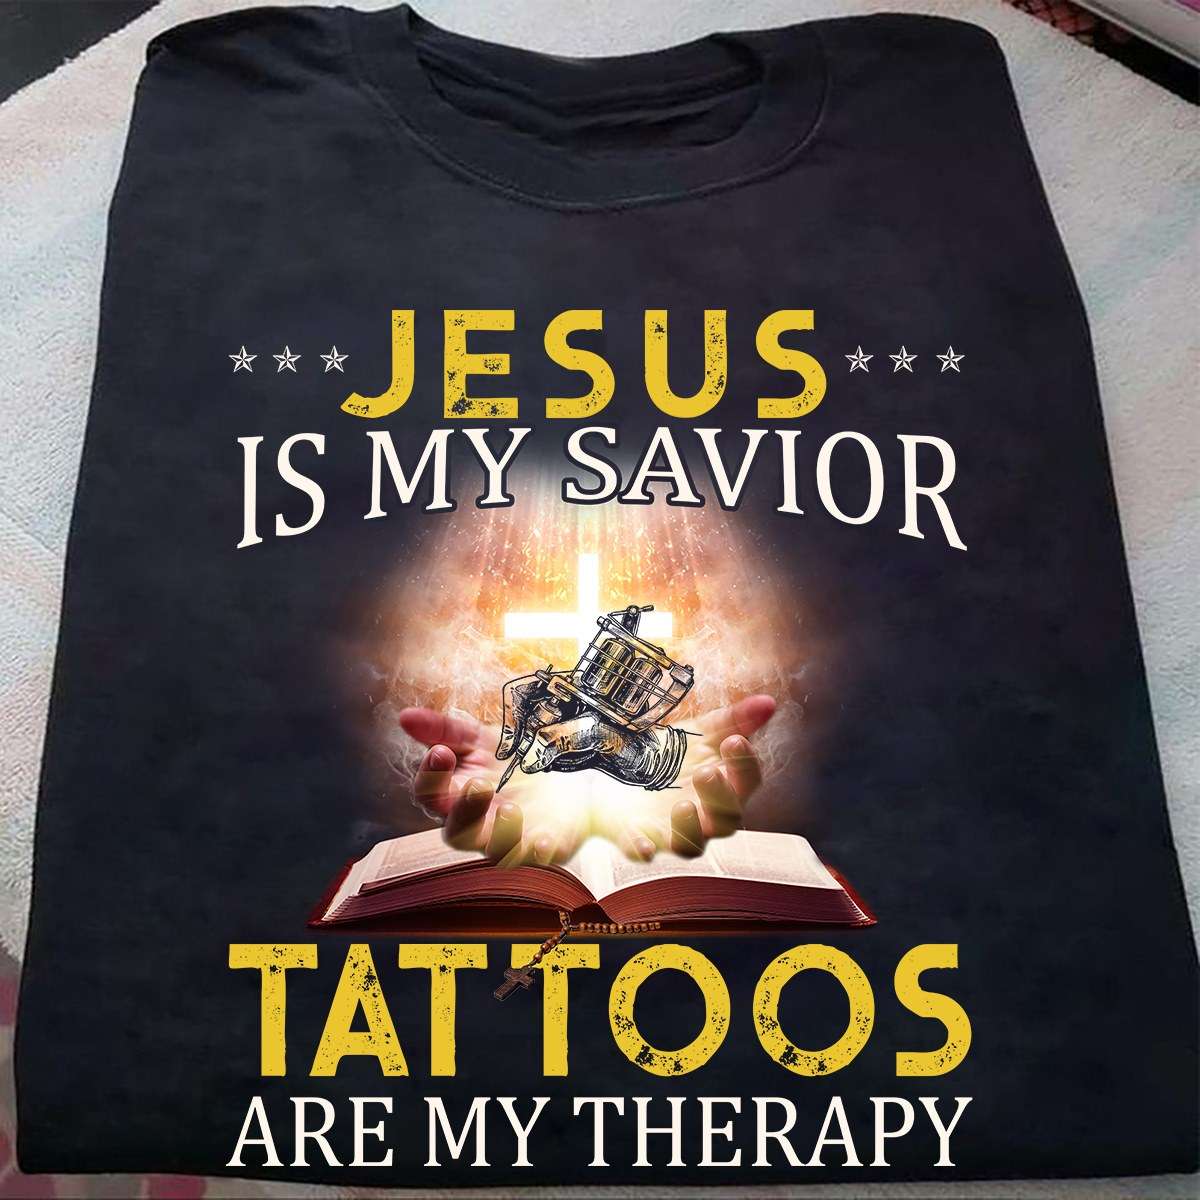 Jesus is my savior, tattoos are my therapy - Jesus the god, tattooed person